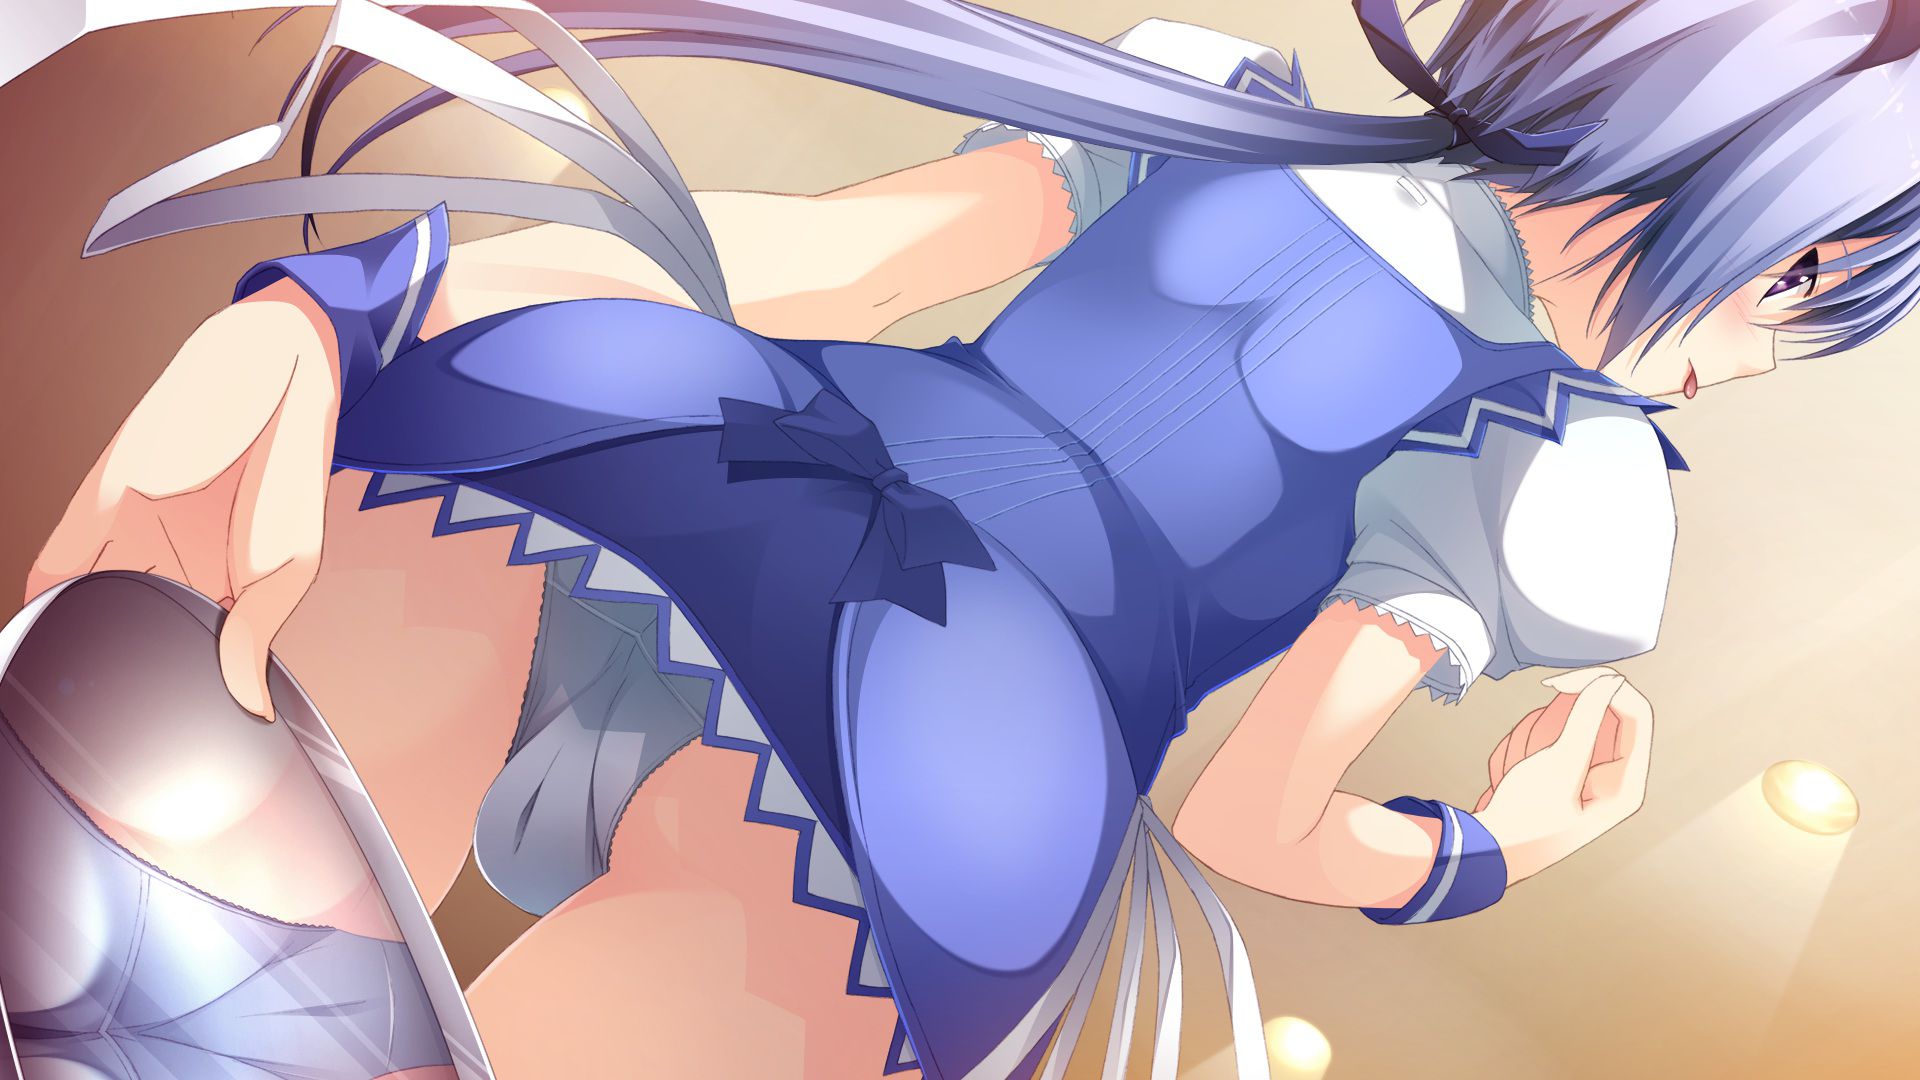 Berry's (Belize) [under age 18 prohibited eroge CG] wallpapers-images part 2 7